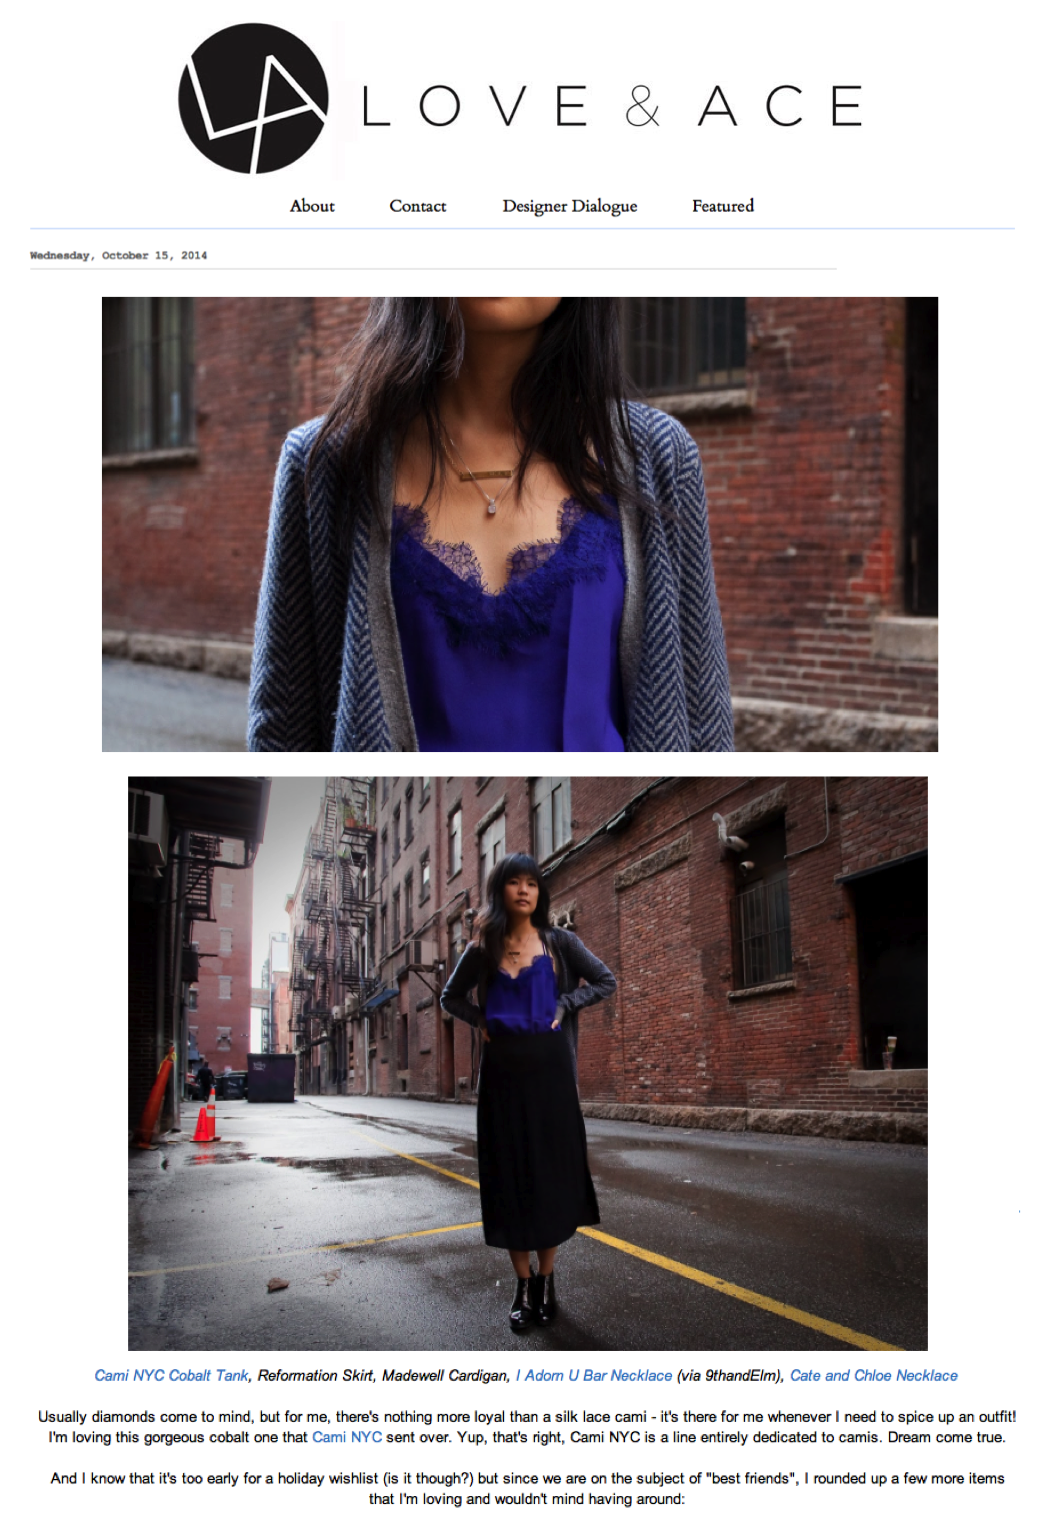 Blog Roll: Cate and Chloe Featured on Love & Ace